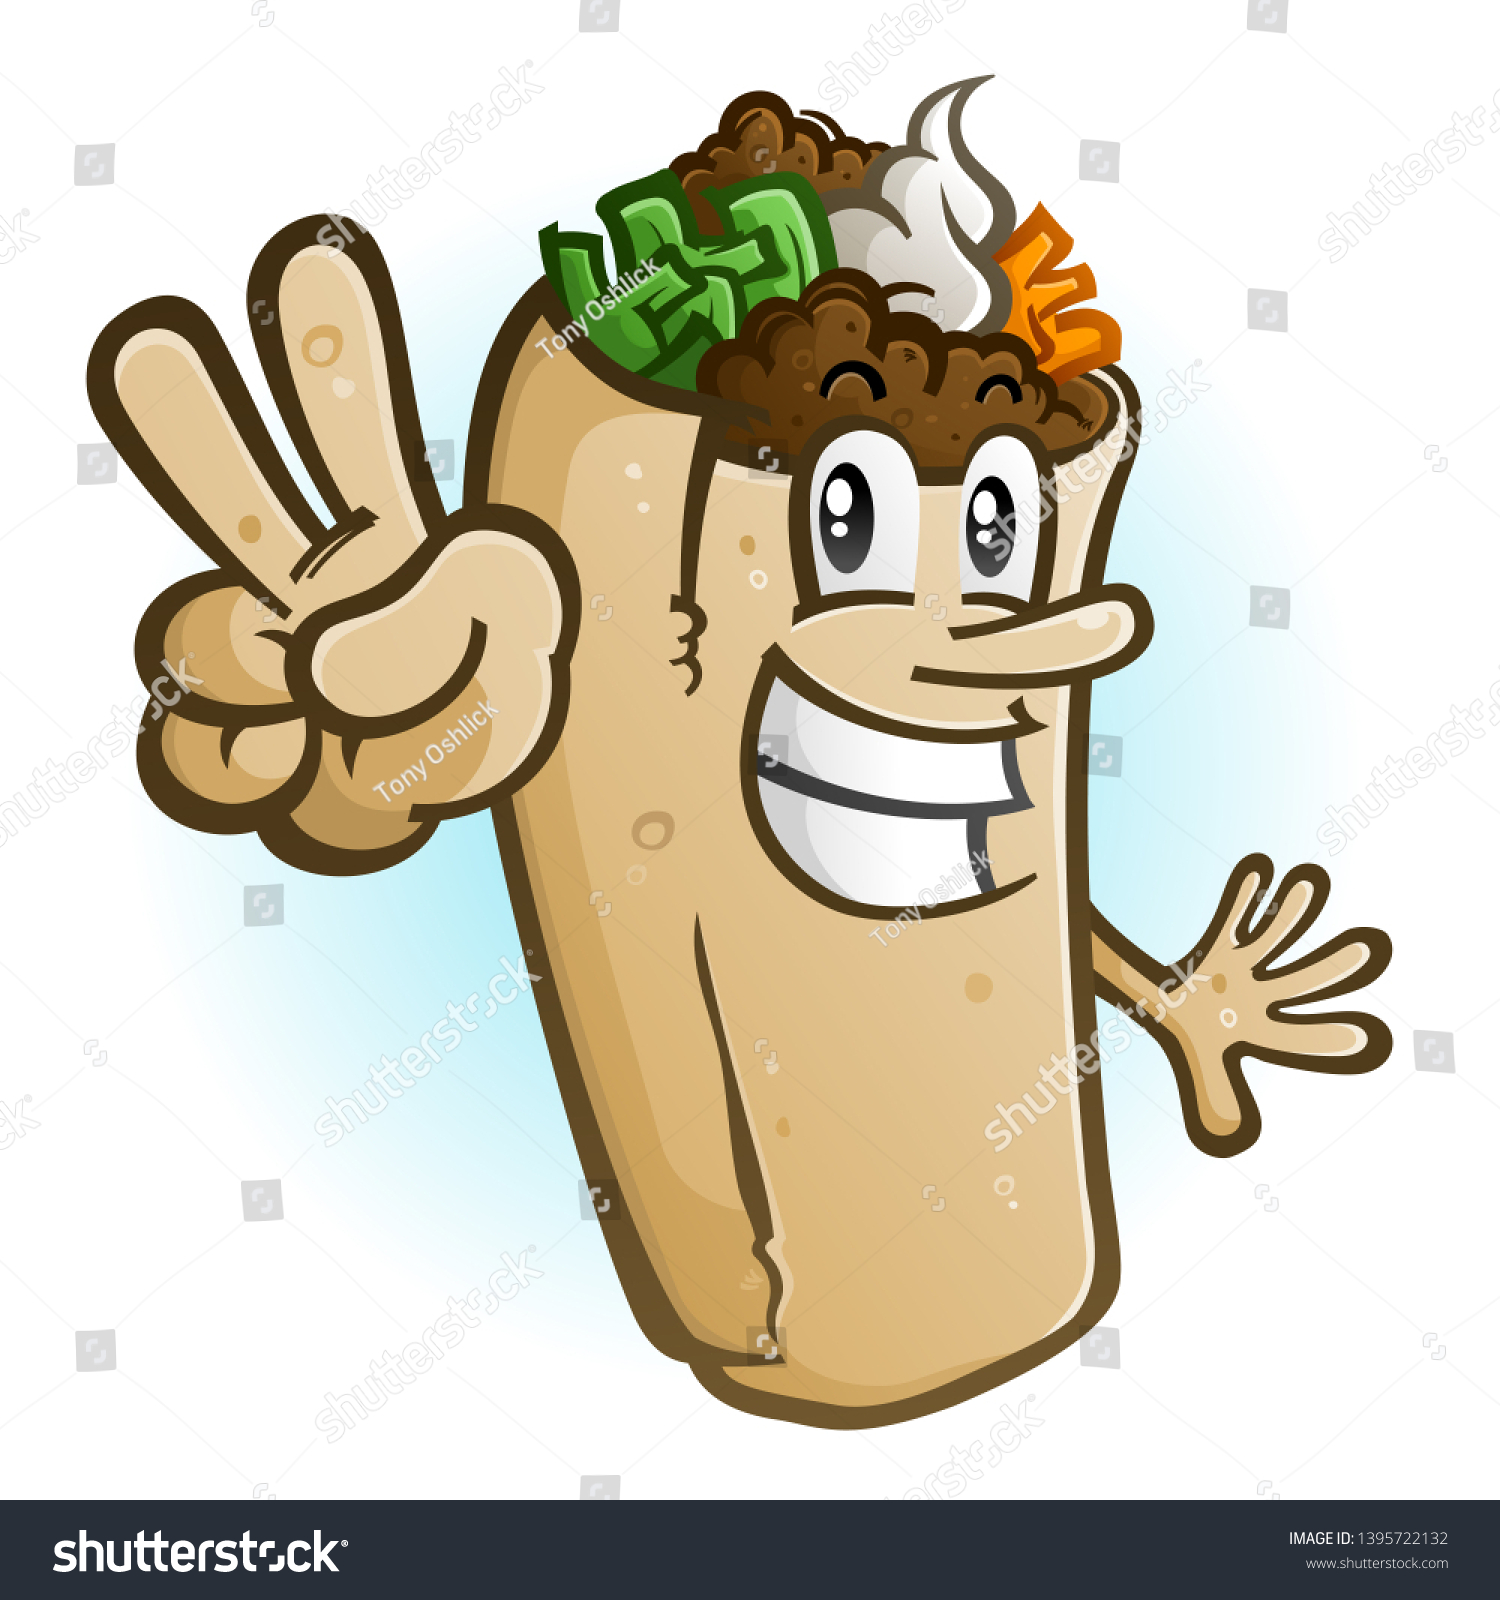 SVG of A cheerful burrito cartoon character vector illustration holding up a two finger hand gesture for peace svg